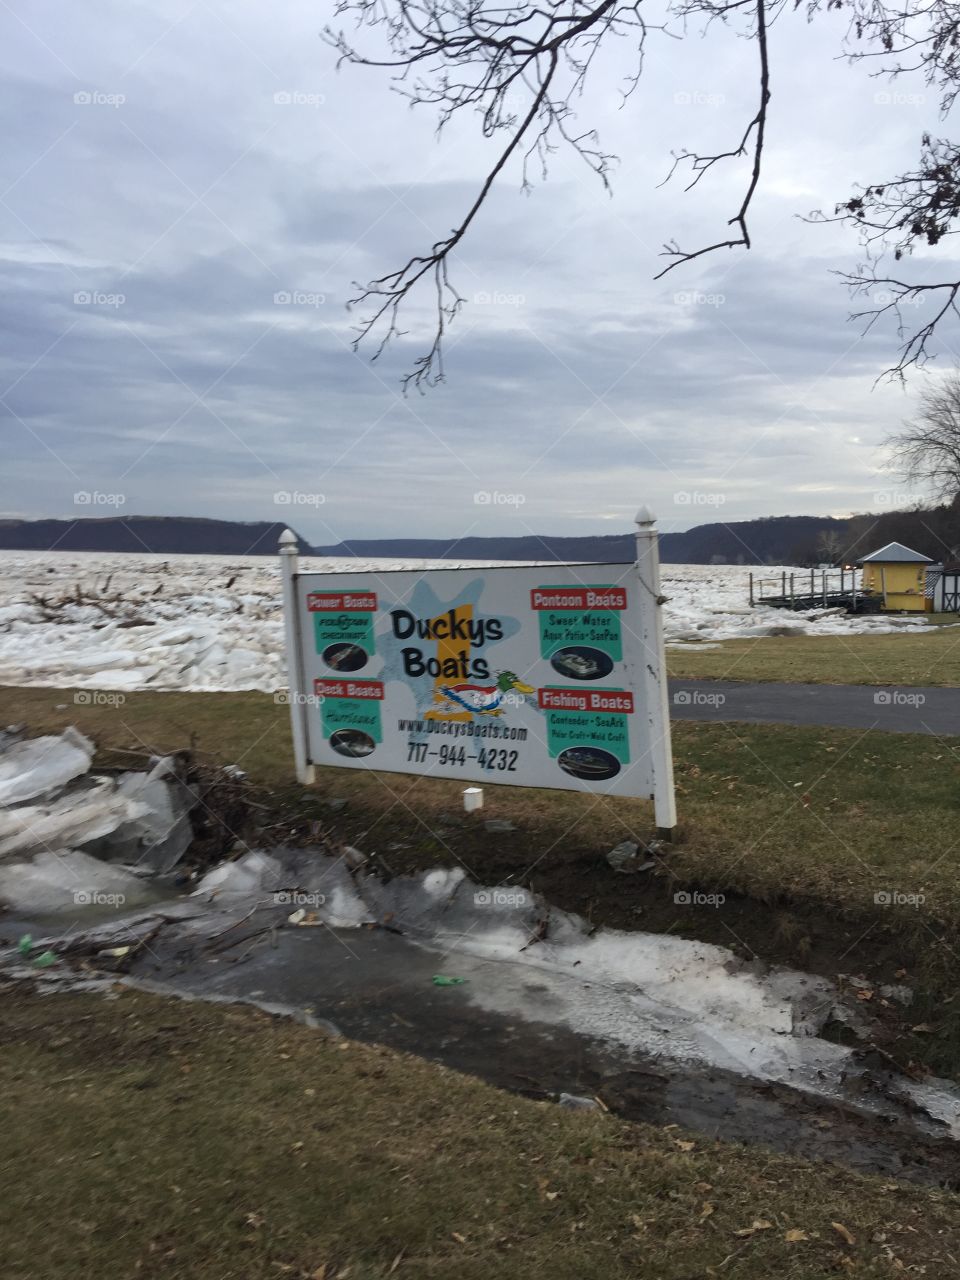 Ice jam on the Susquehanna love the sign ducky’s boats no boats on this river today 